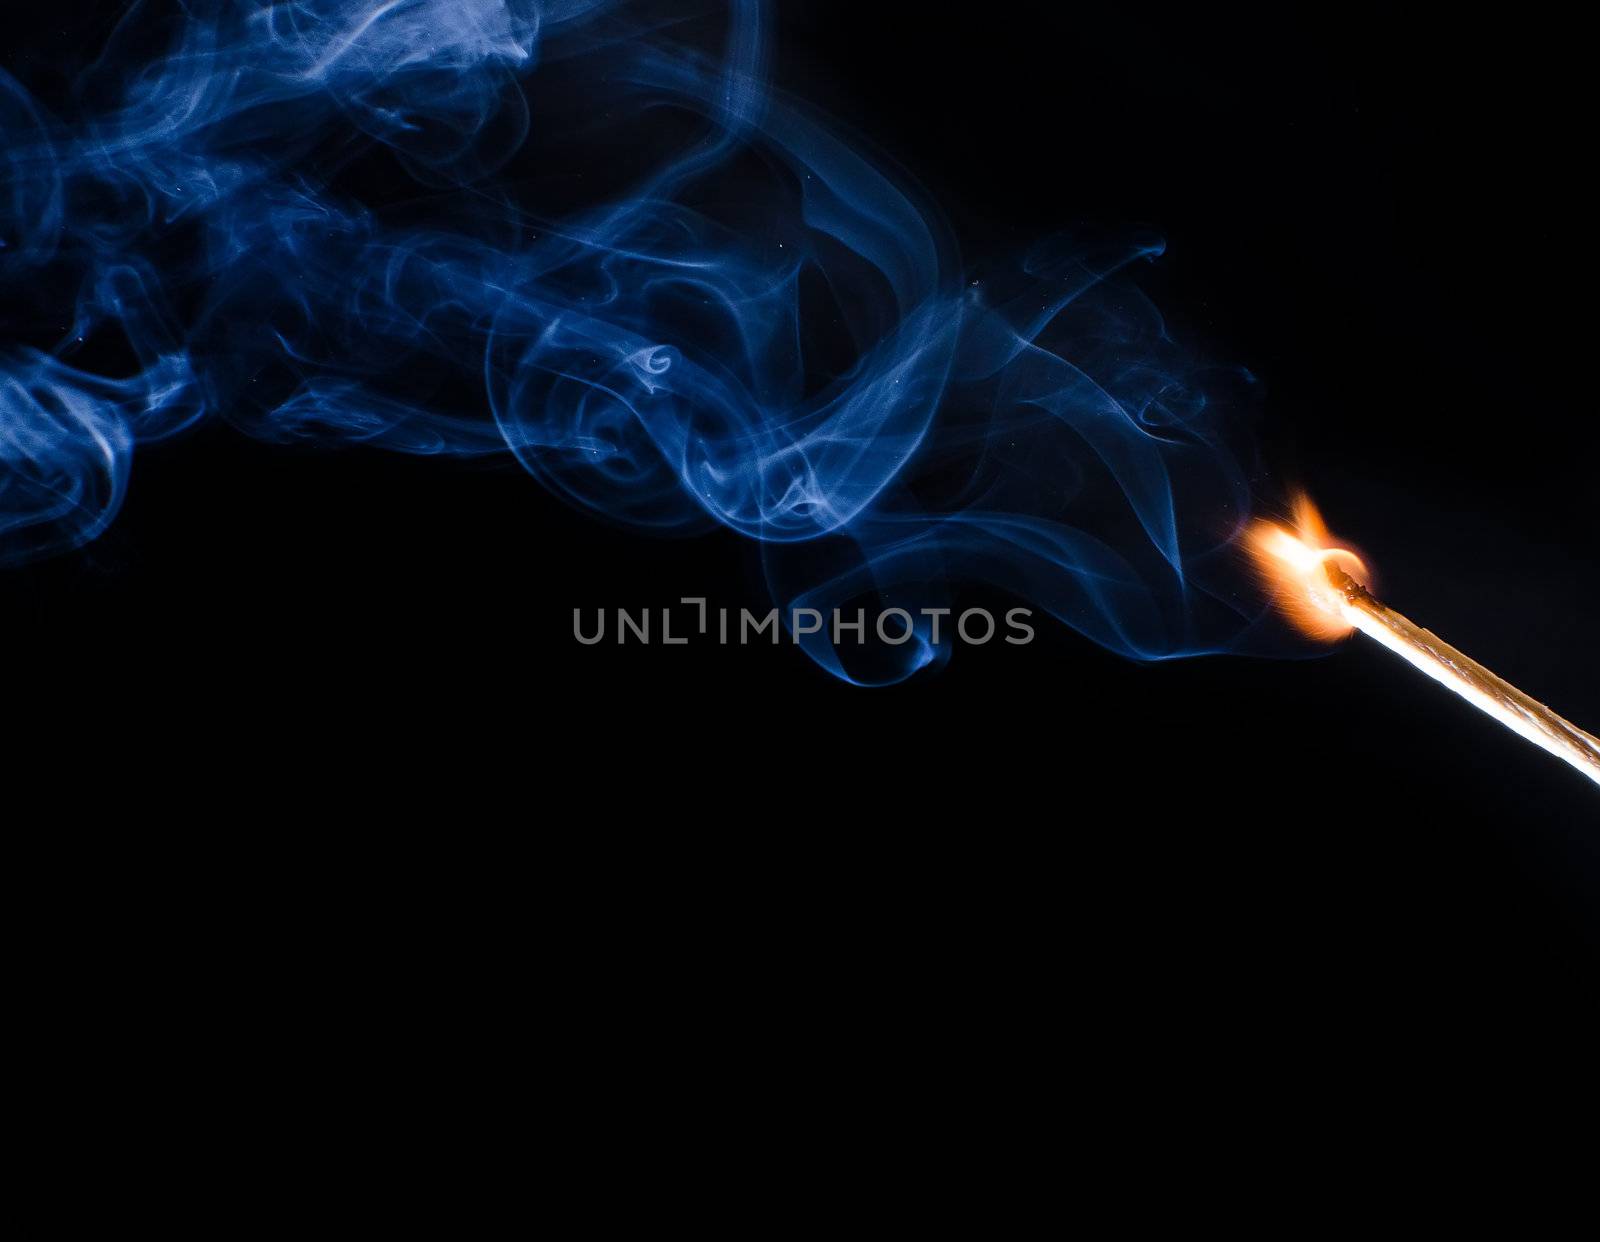 Match ignition with smoke over black background by dmitrimaruta